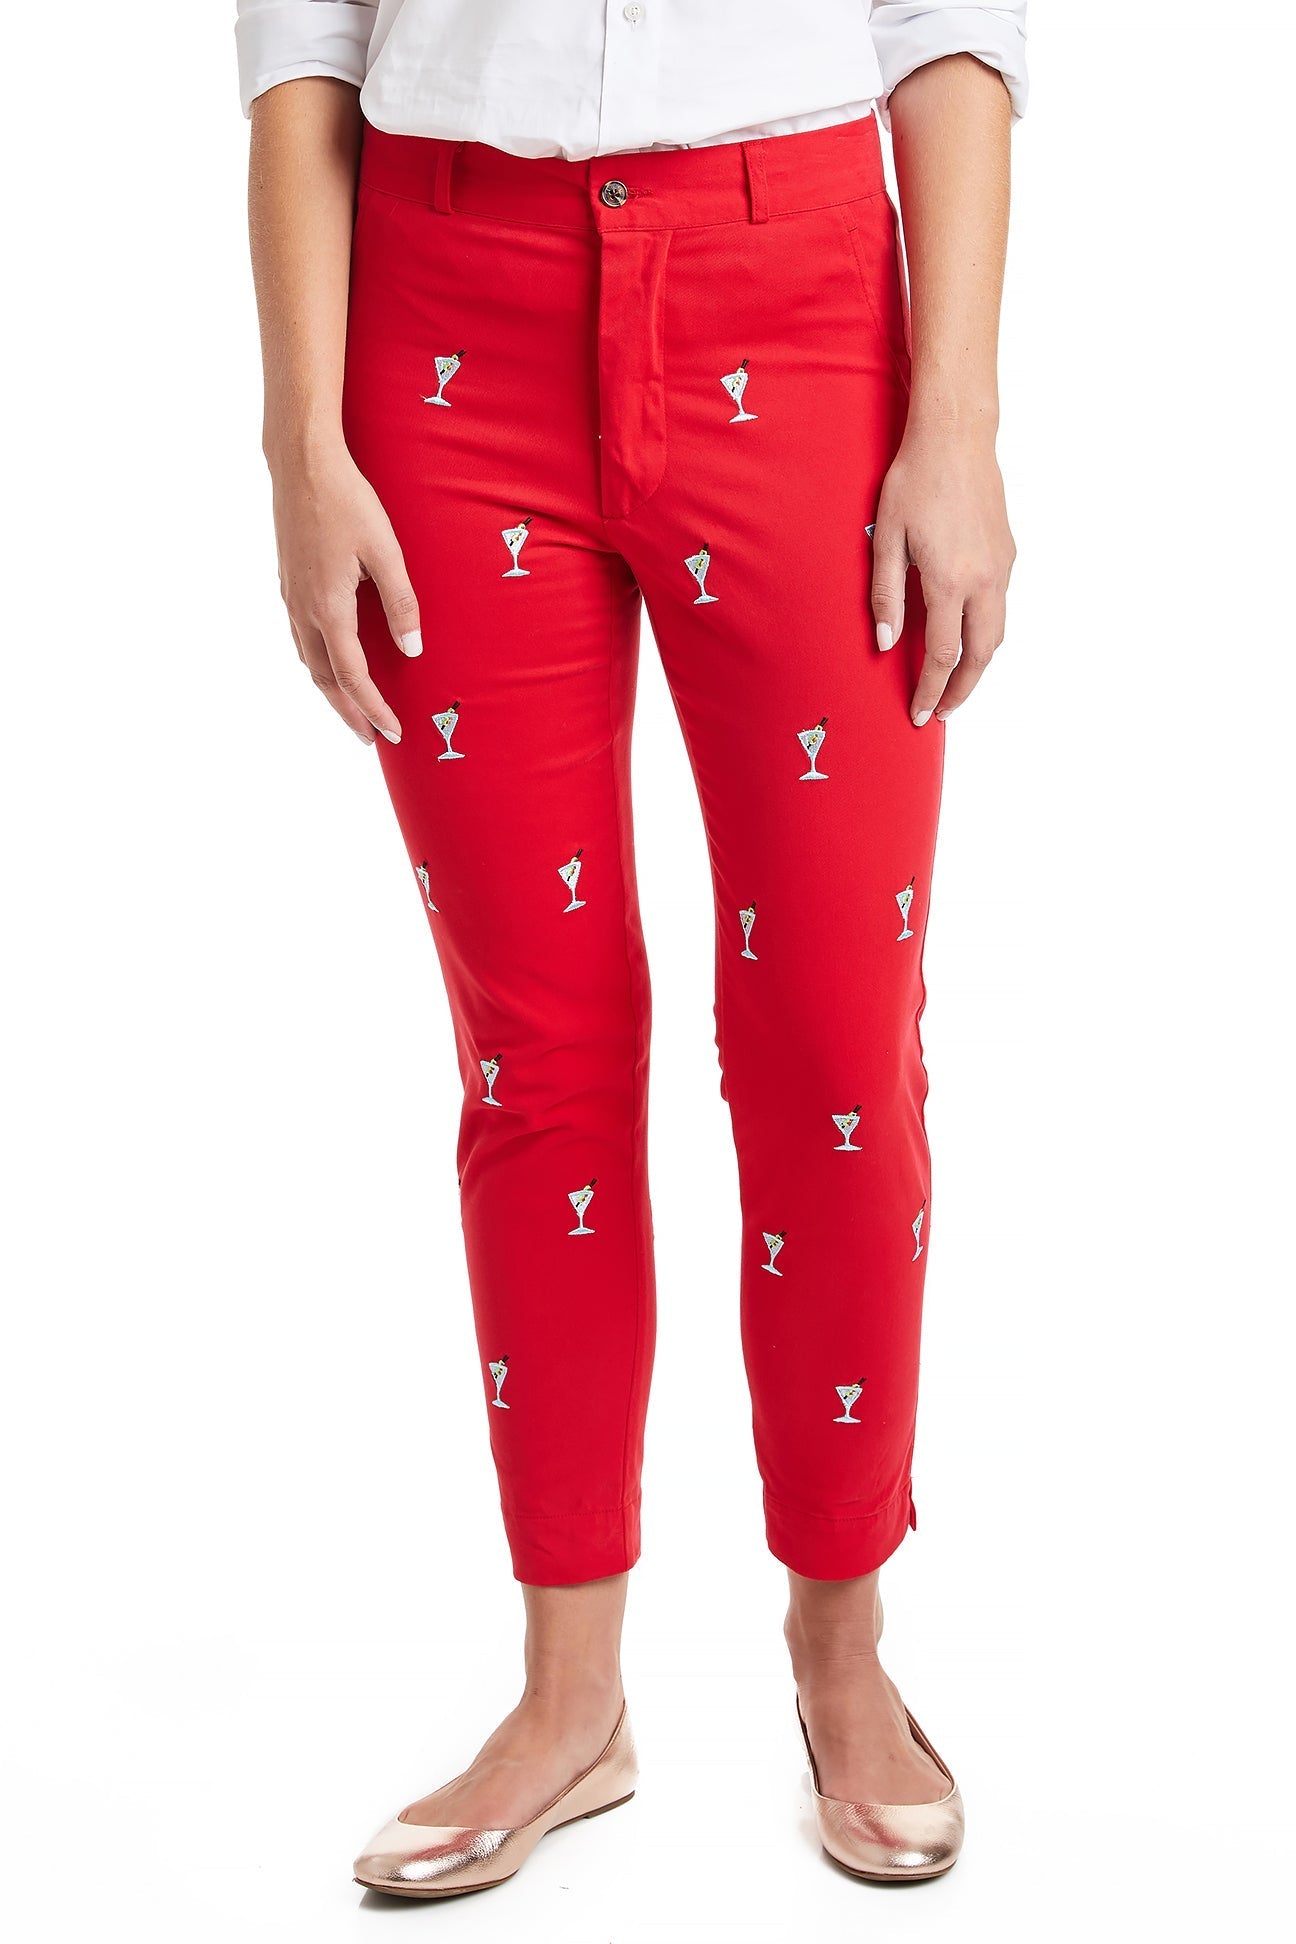 Ladies Ankle Holiday Capri Red with Martini – Castaway Nantucket